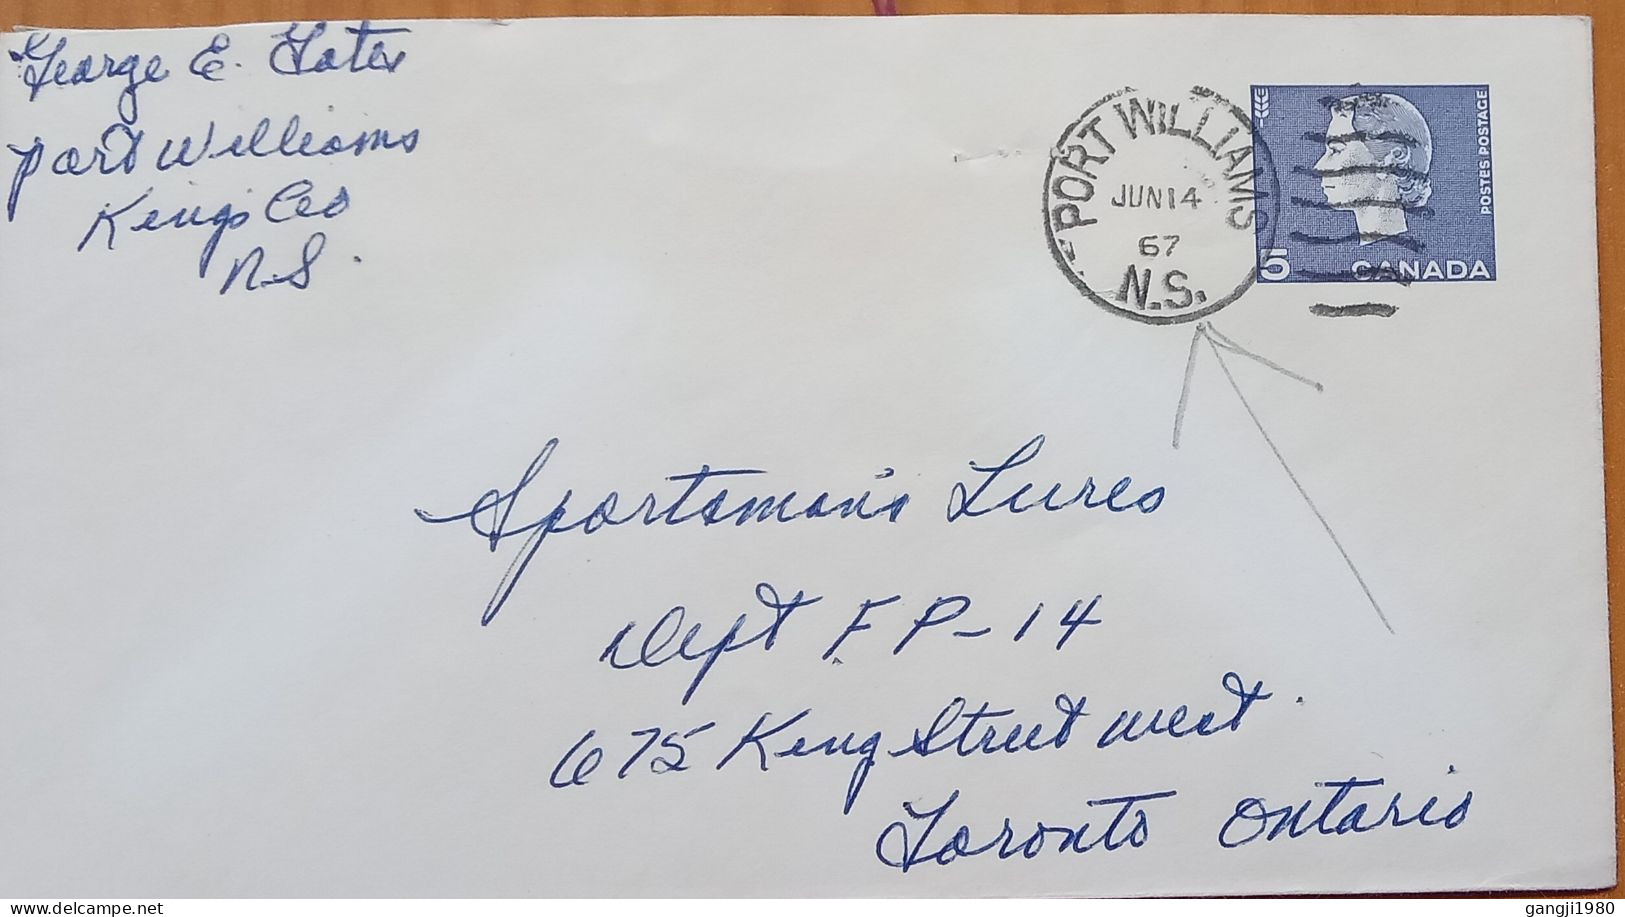 CANADA 1967, POSTAL STATIONERY, COVER USED, QUEEN PORTRAIT,  PORT WILLIAMS CITY CANCEL. - Covers & Documents